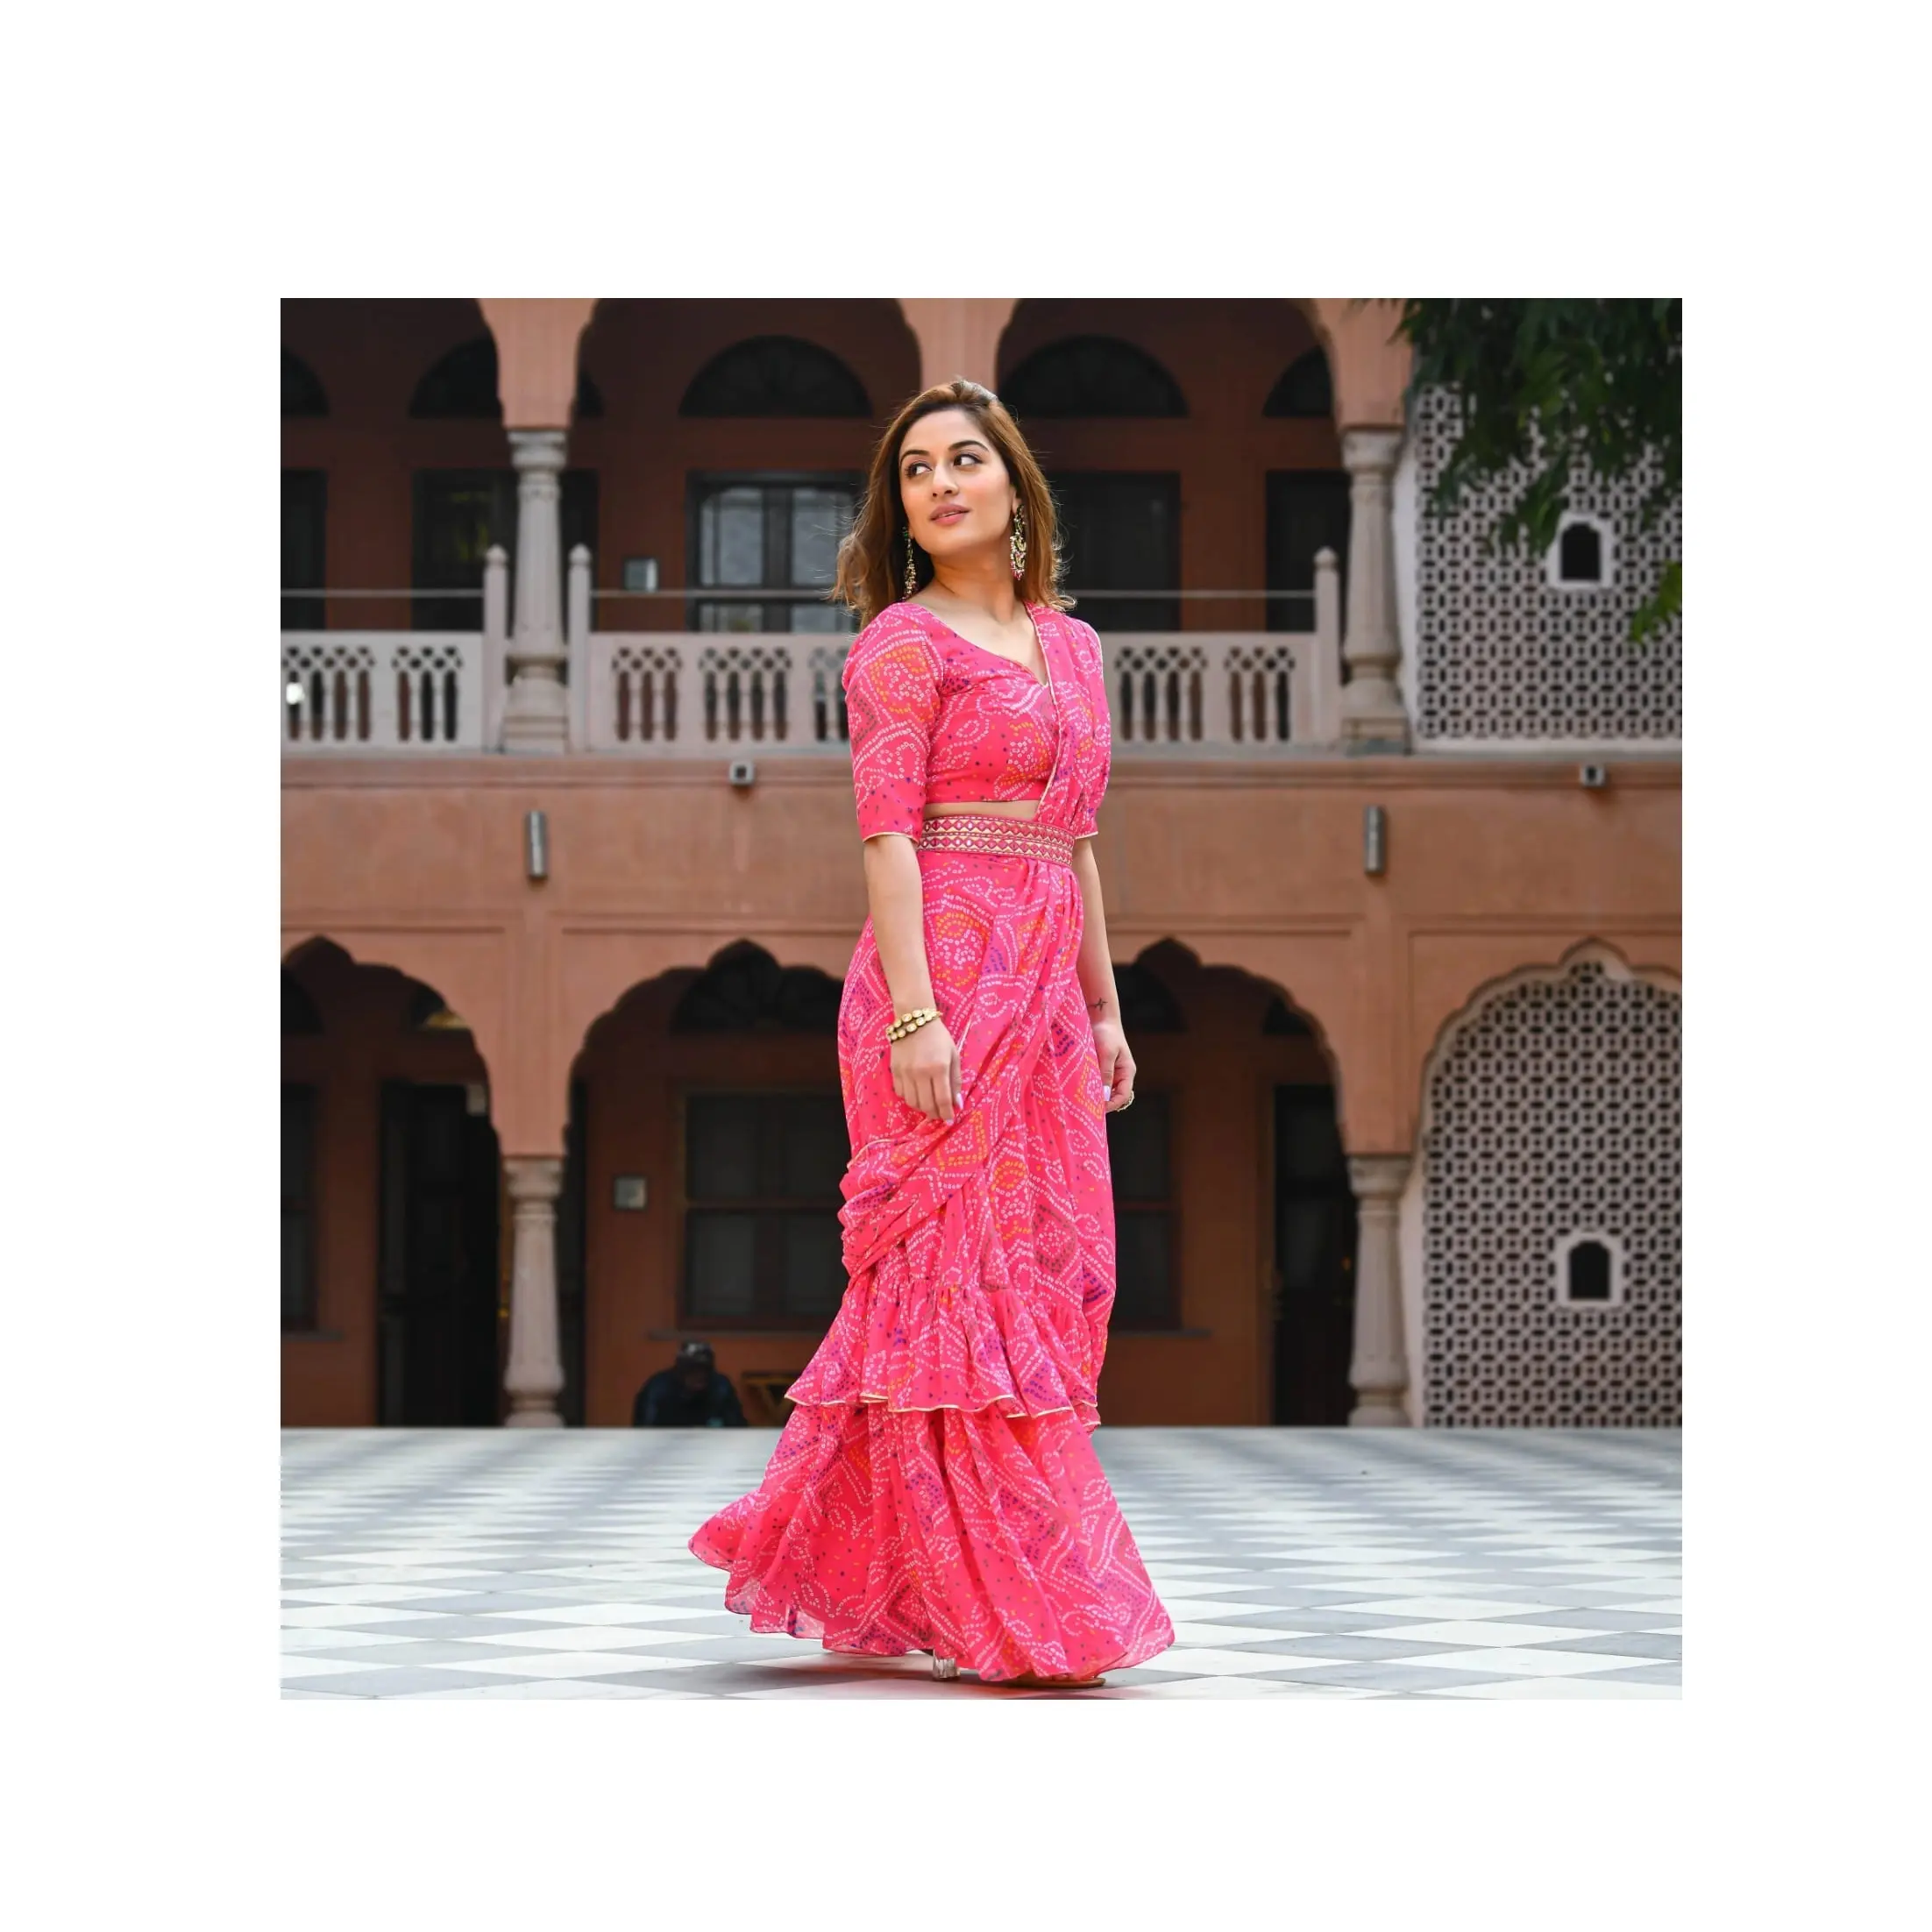 New Collection Party Wear Lahenga Saree with Stich Blouse for Women Wedding and Party Wear from Indian Supplier